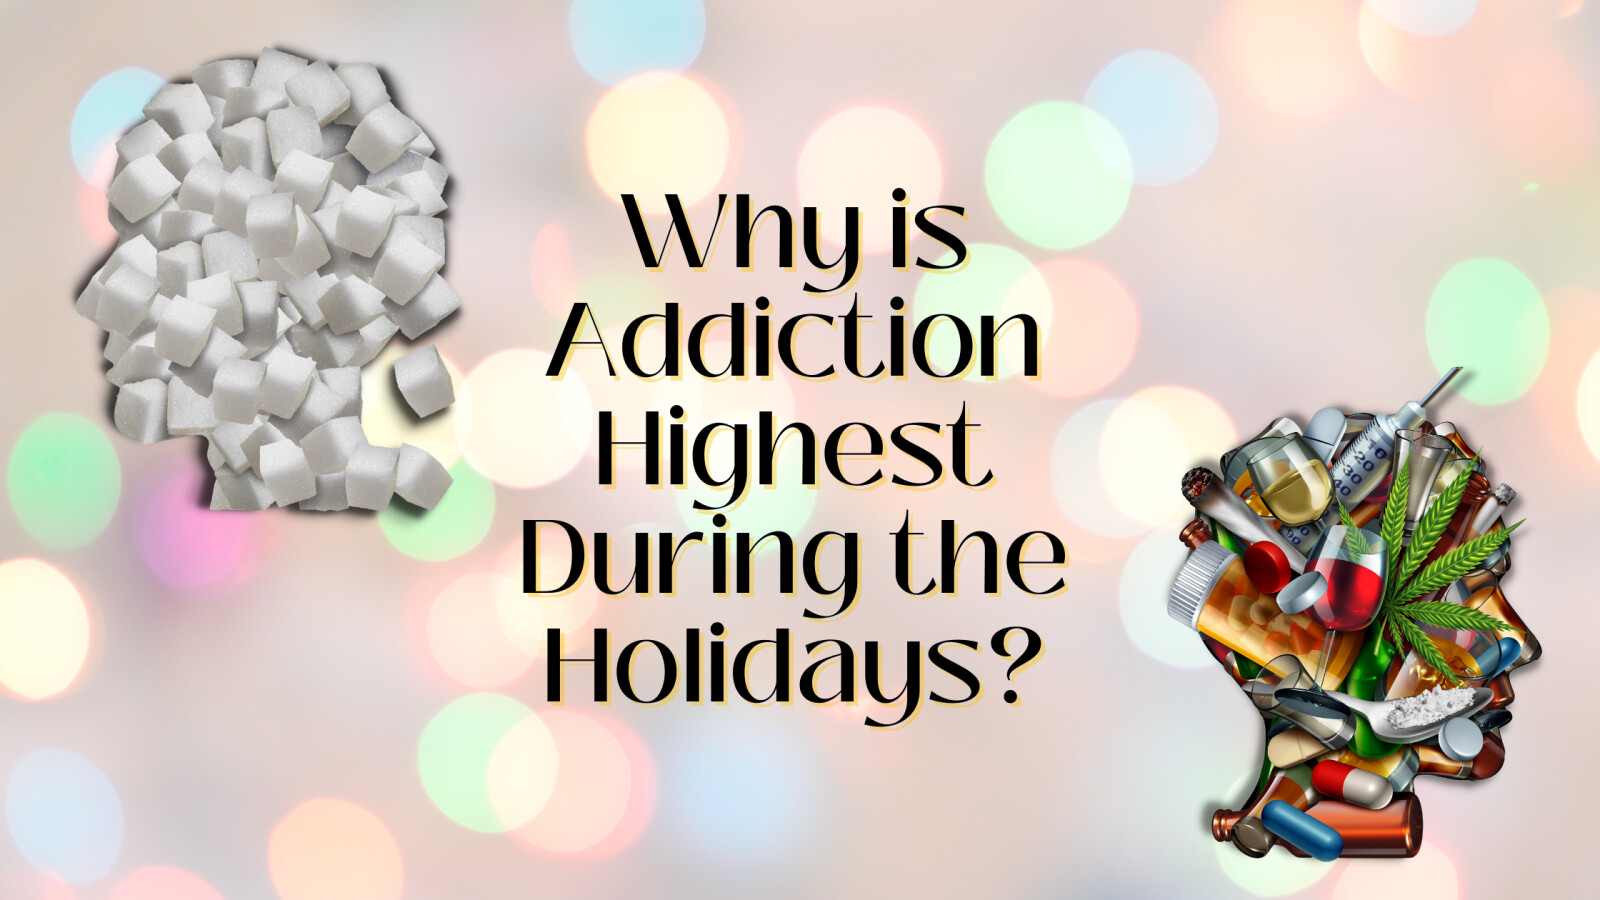 Why is Addiction Highest During the Holidays?